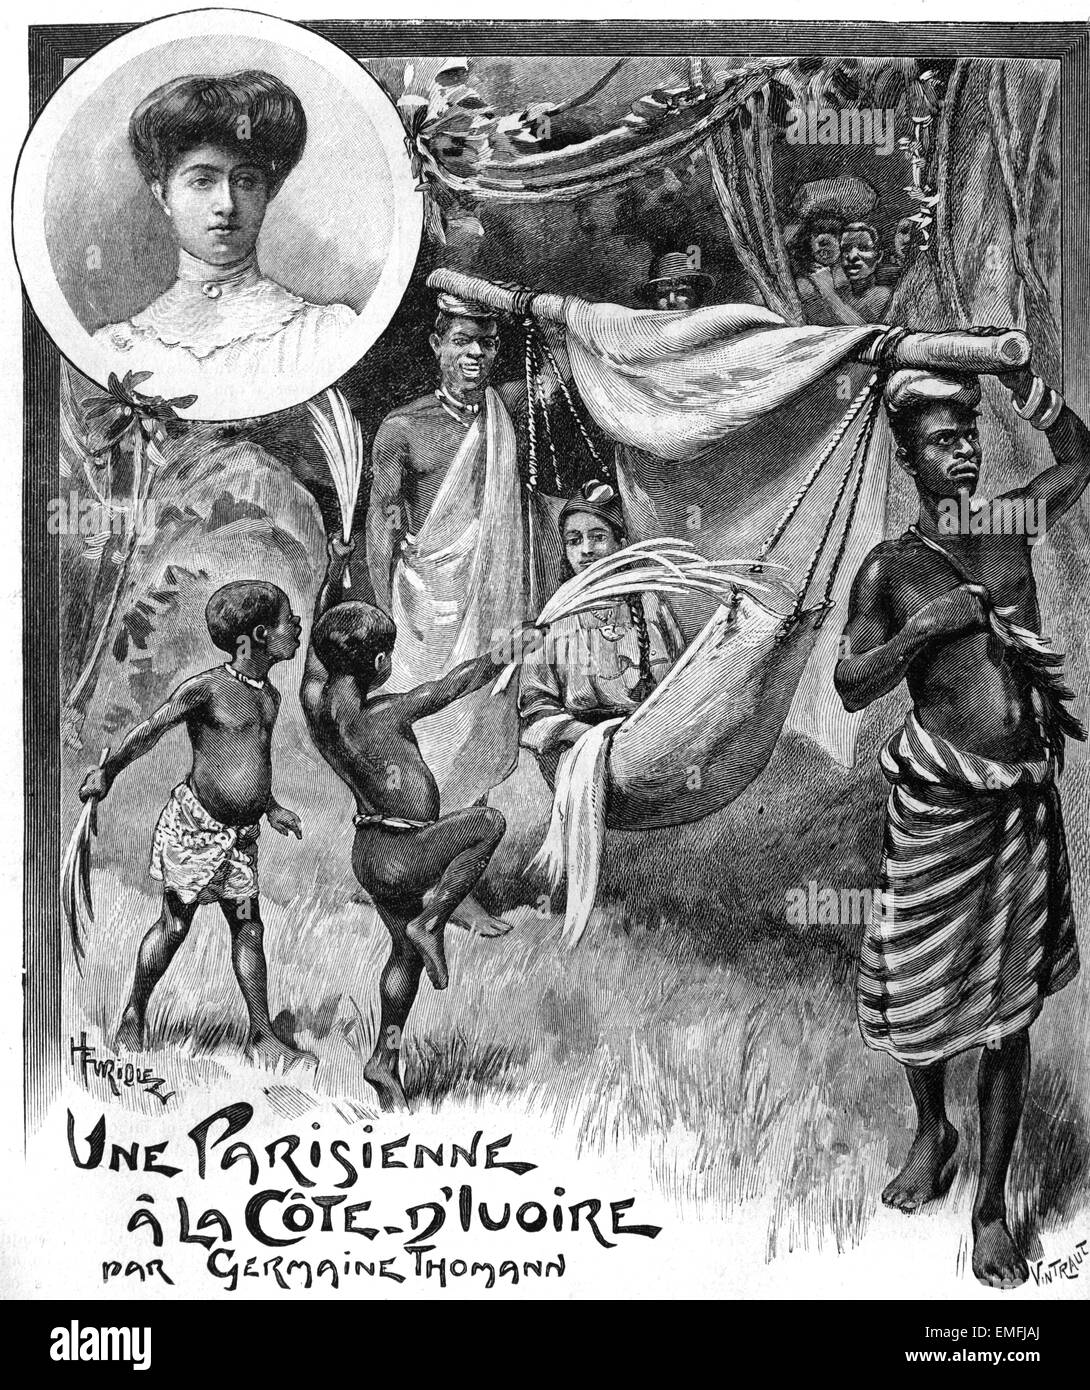 European or Parisian Traveller Traveling by Palanquin Carried by Local Natives in French Colonial Ivory Coast Africa 1910. Reminiscences 'Une Parisienne à La Côte d'Ivoire' by Germaine  Thomann 1910 Stock Photo